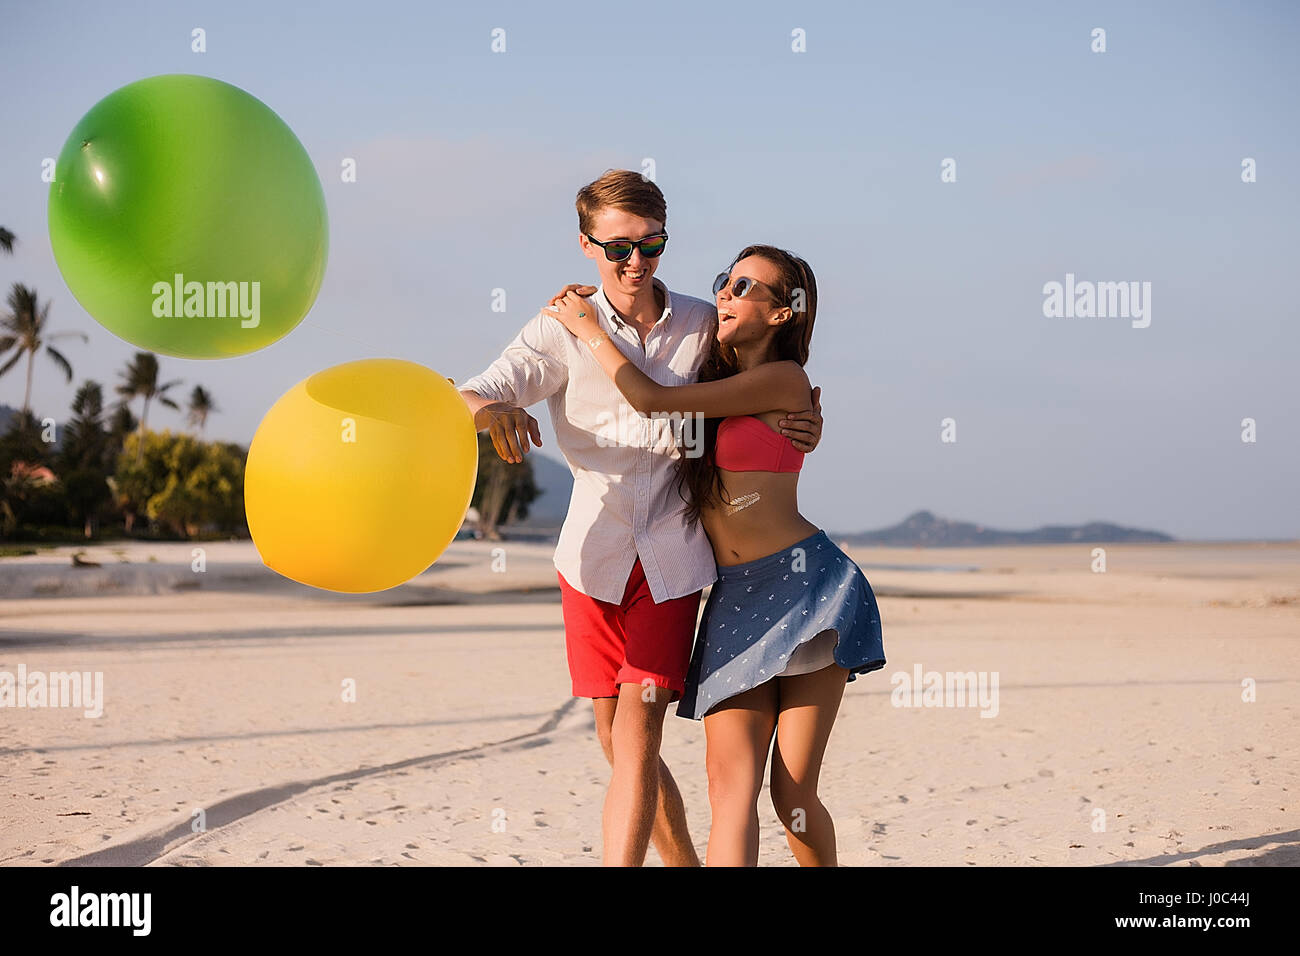 Young couple on beach playing with balloons, Koh Samui, Thailand Stock Photo